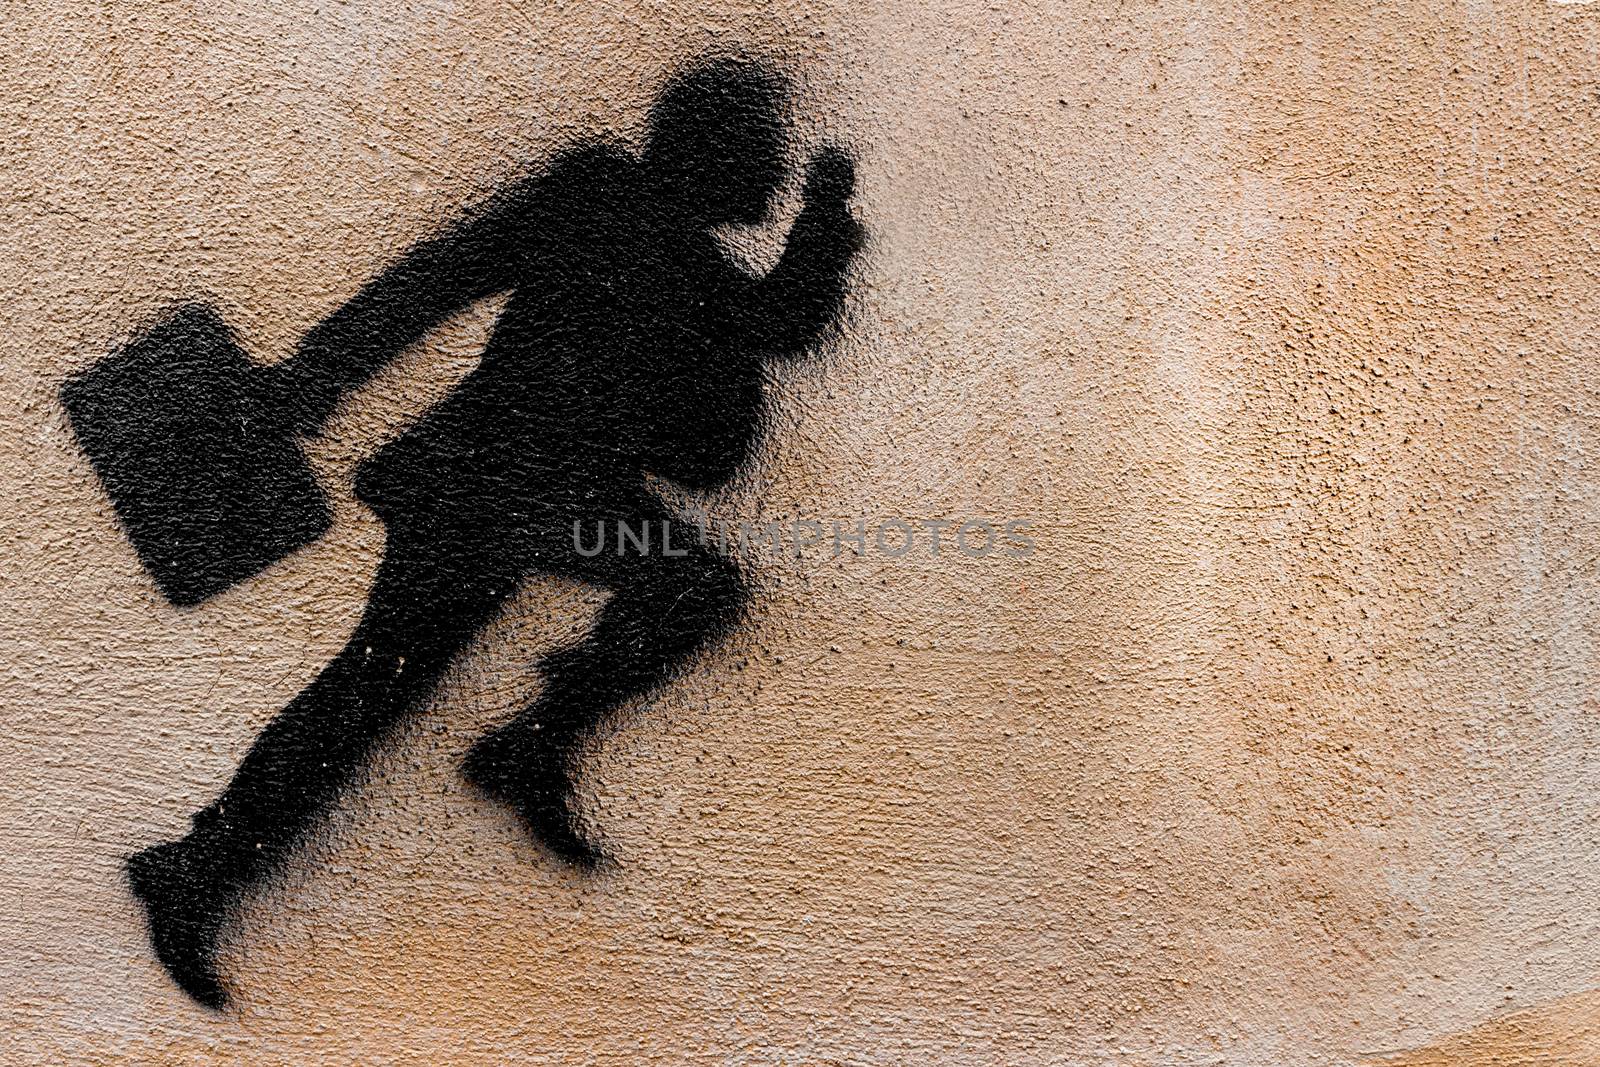 Graphical representation of a runner businessman on a plastered wall.